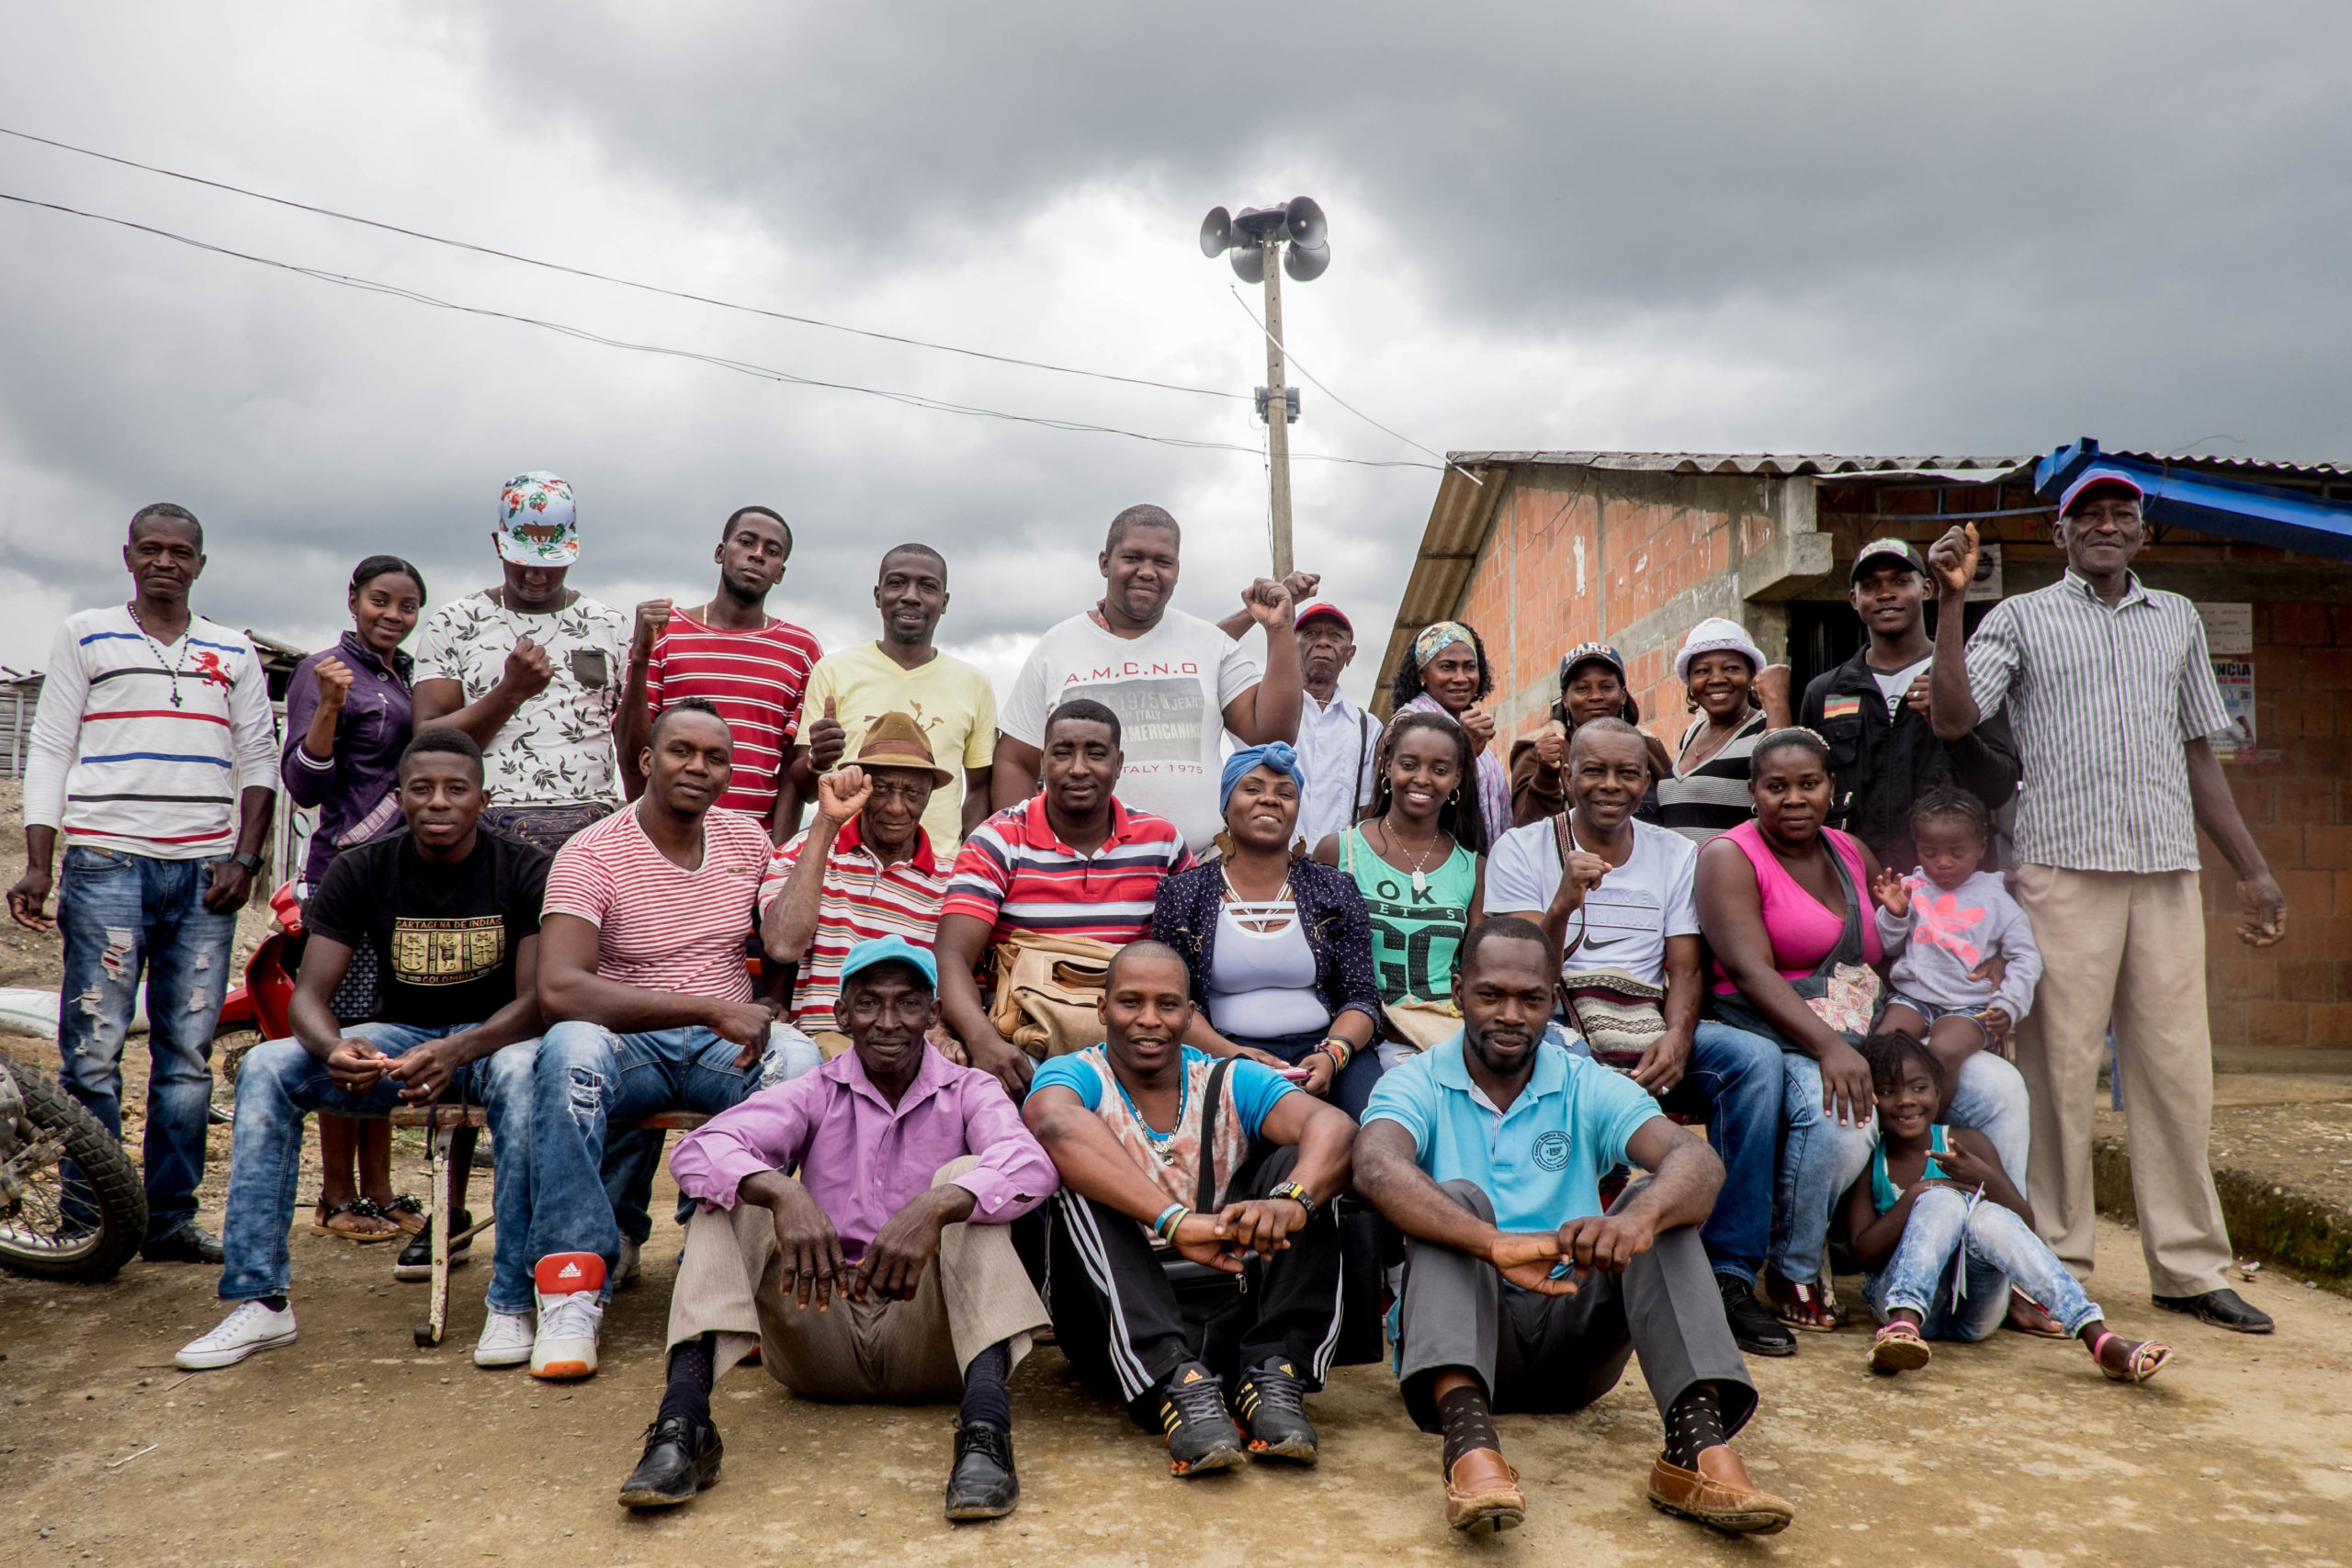 Left-wing candidate Francia Márquez (fourth from left in the second row) poses with members of the Afro-Colombian community in La Toma, Cauca department / credit: Goldman Environmental Prize